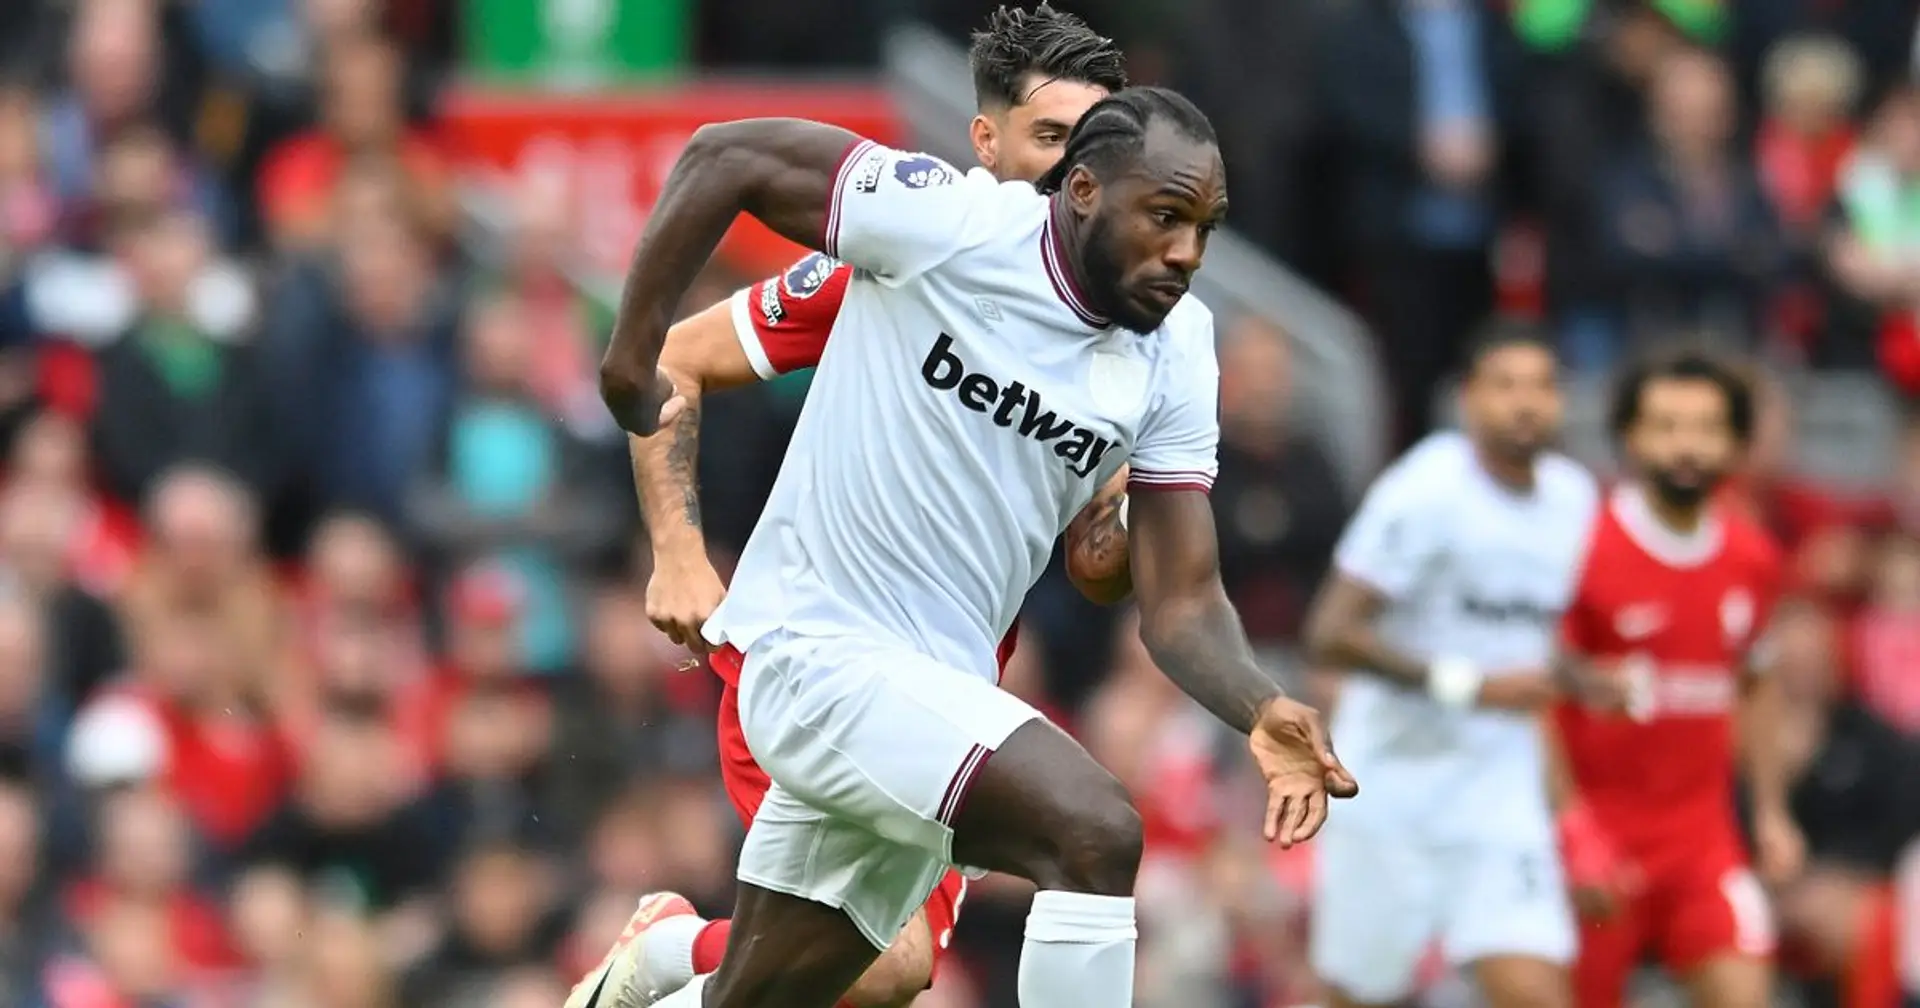 No shots on target, big chance missed: Michail Antonio boastful claims come back to bite him at Anfield